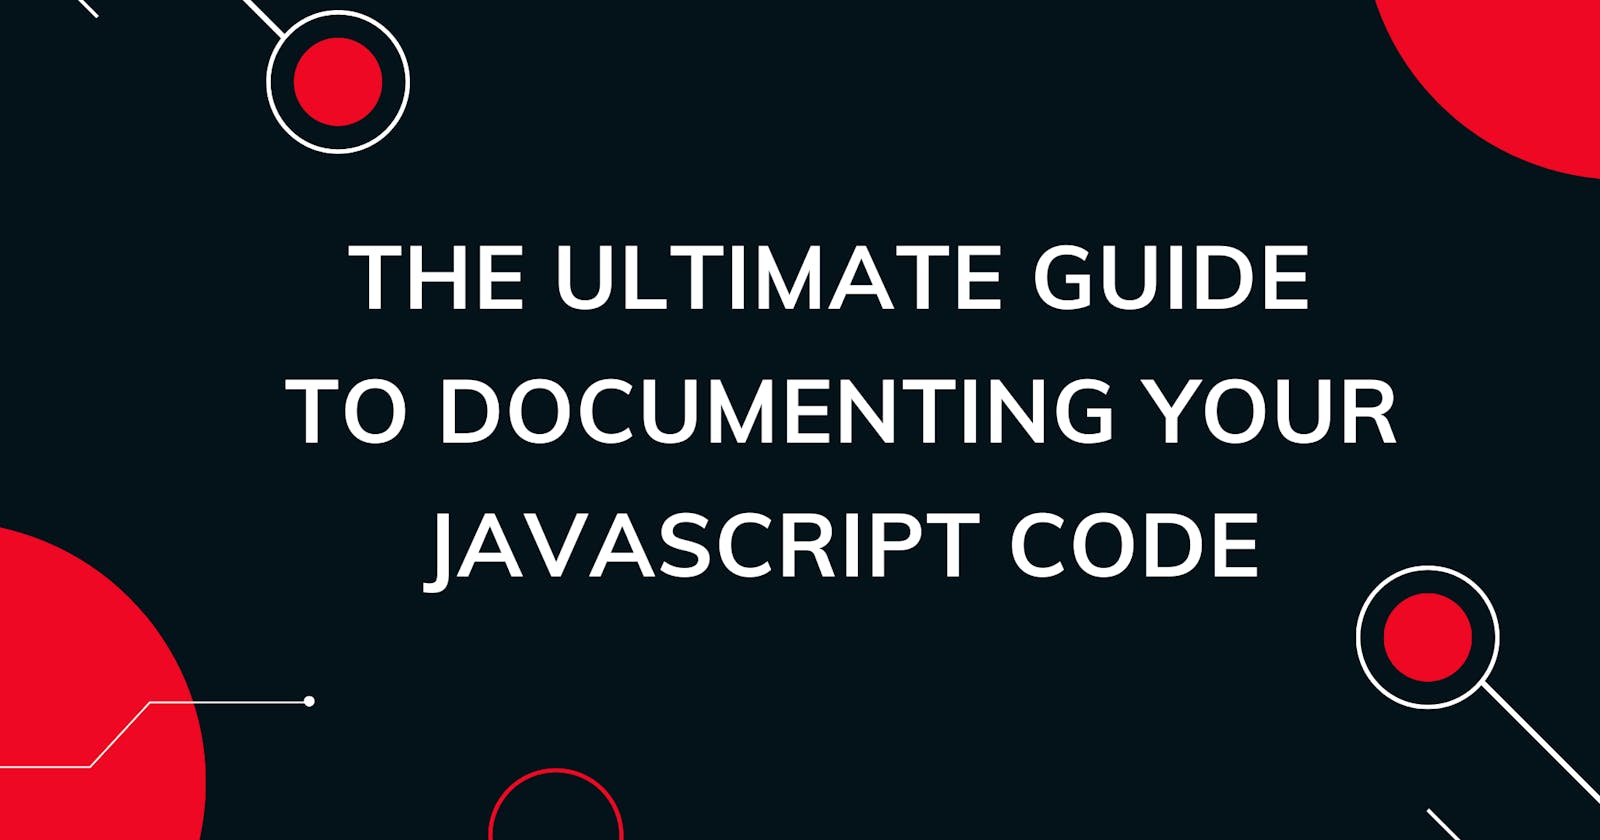 JSDoc: The ultimate guide to documenting your JavaScript code